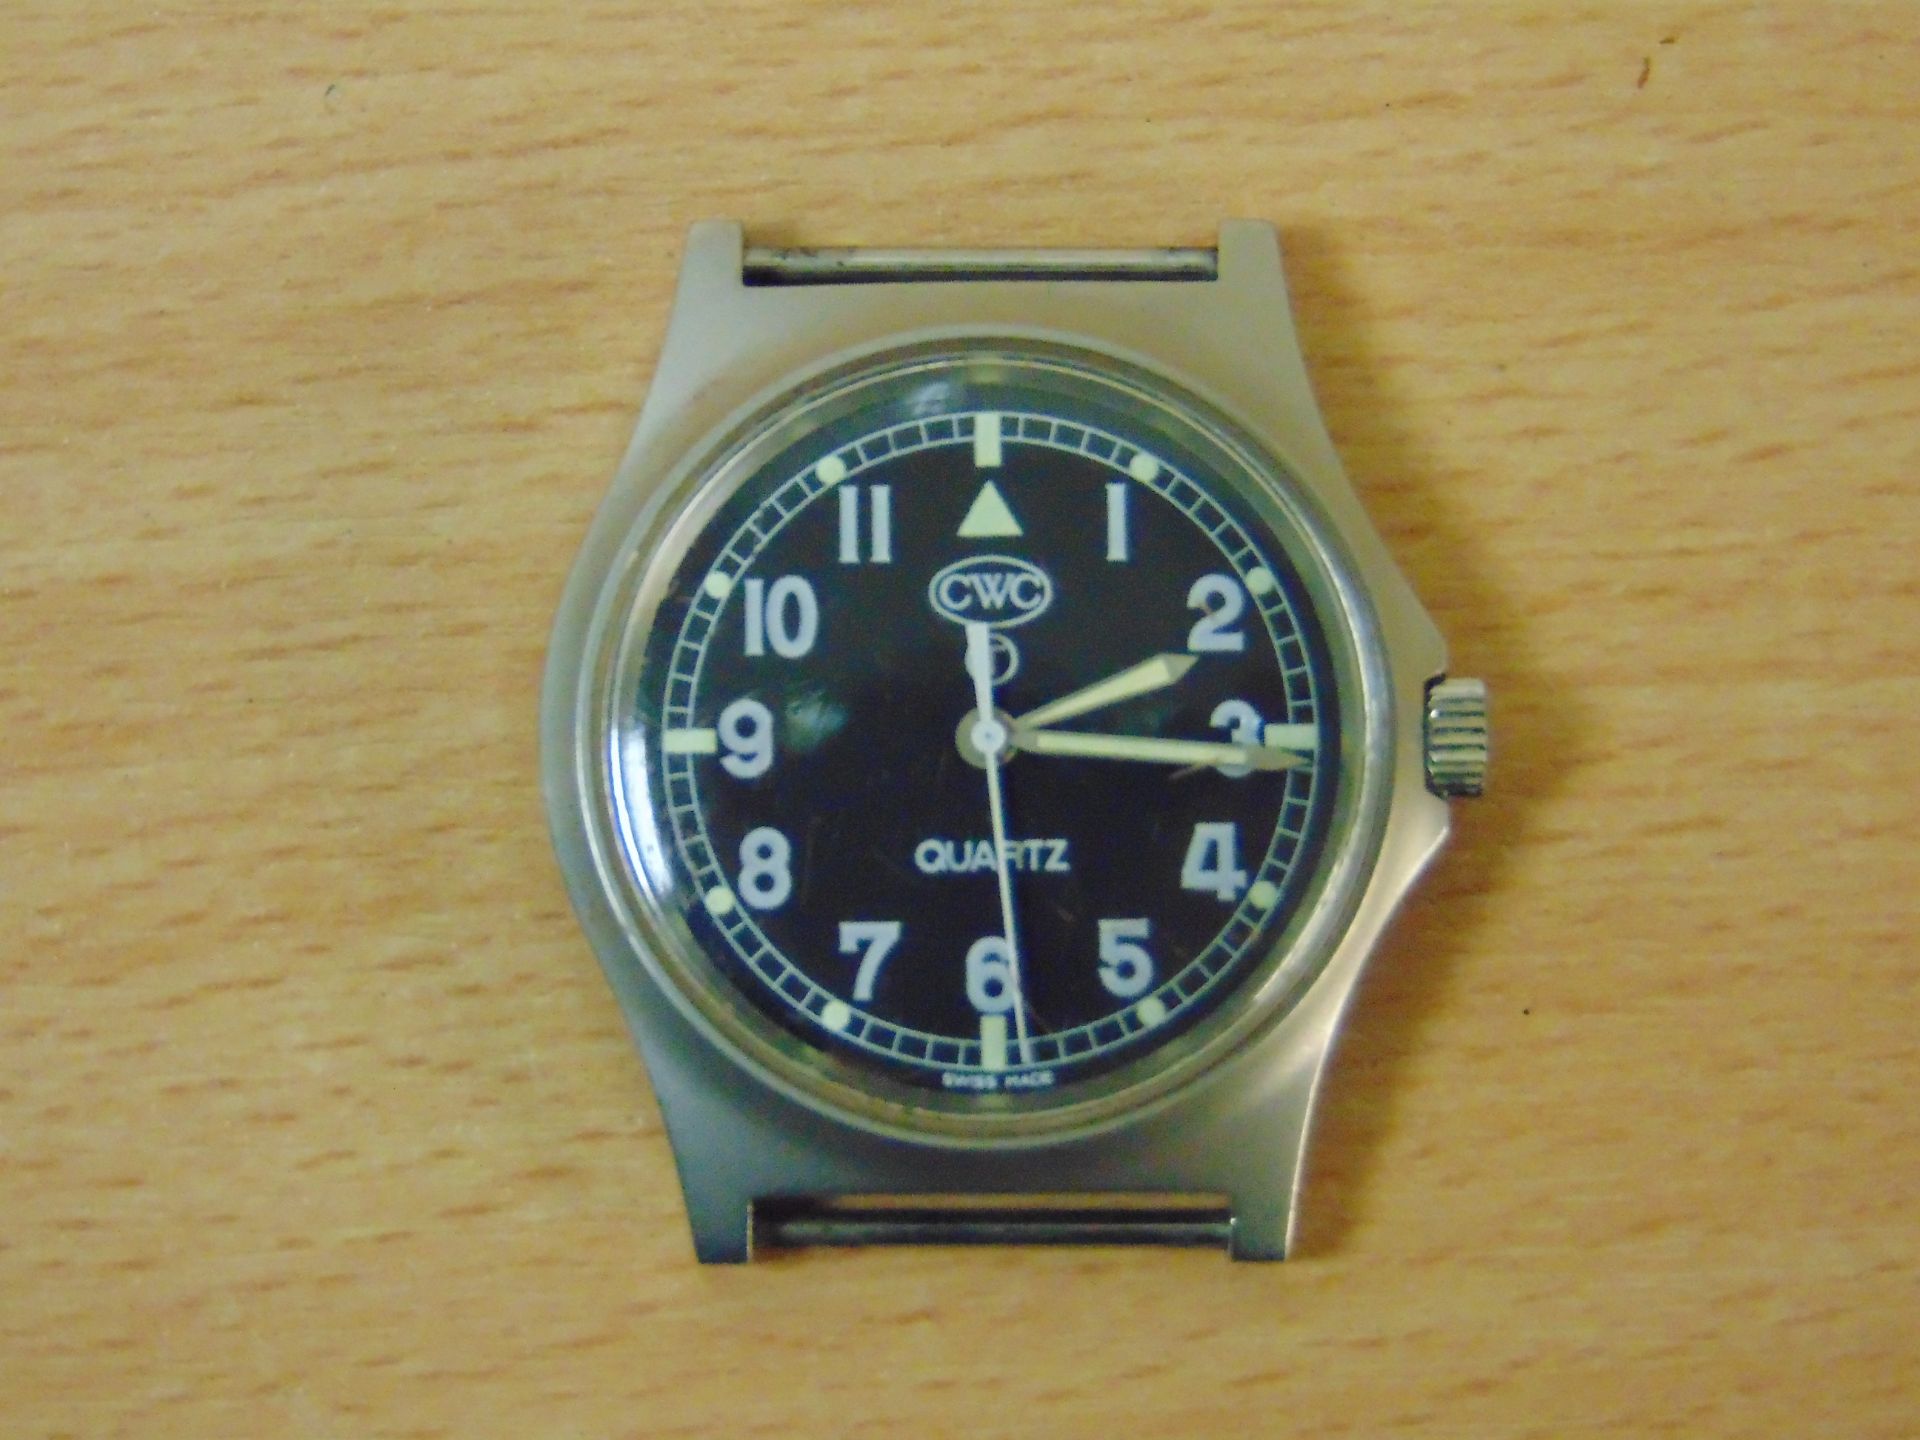 VERY RARE 0552 CWC ROYAL MARINES ISSUE SERVICE WATCH DATE 1989 (GULF WAR) - Image 2 of 9